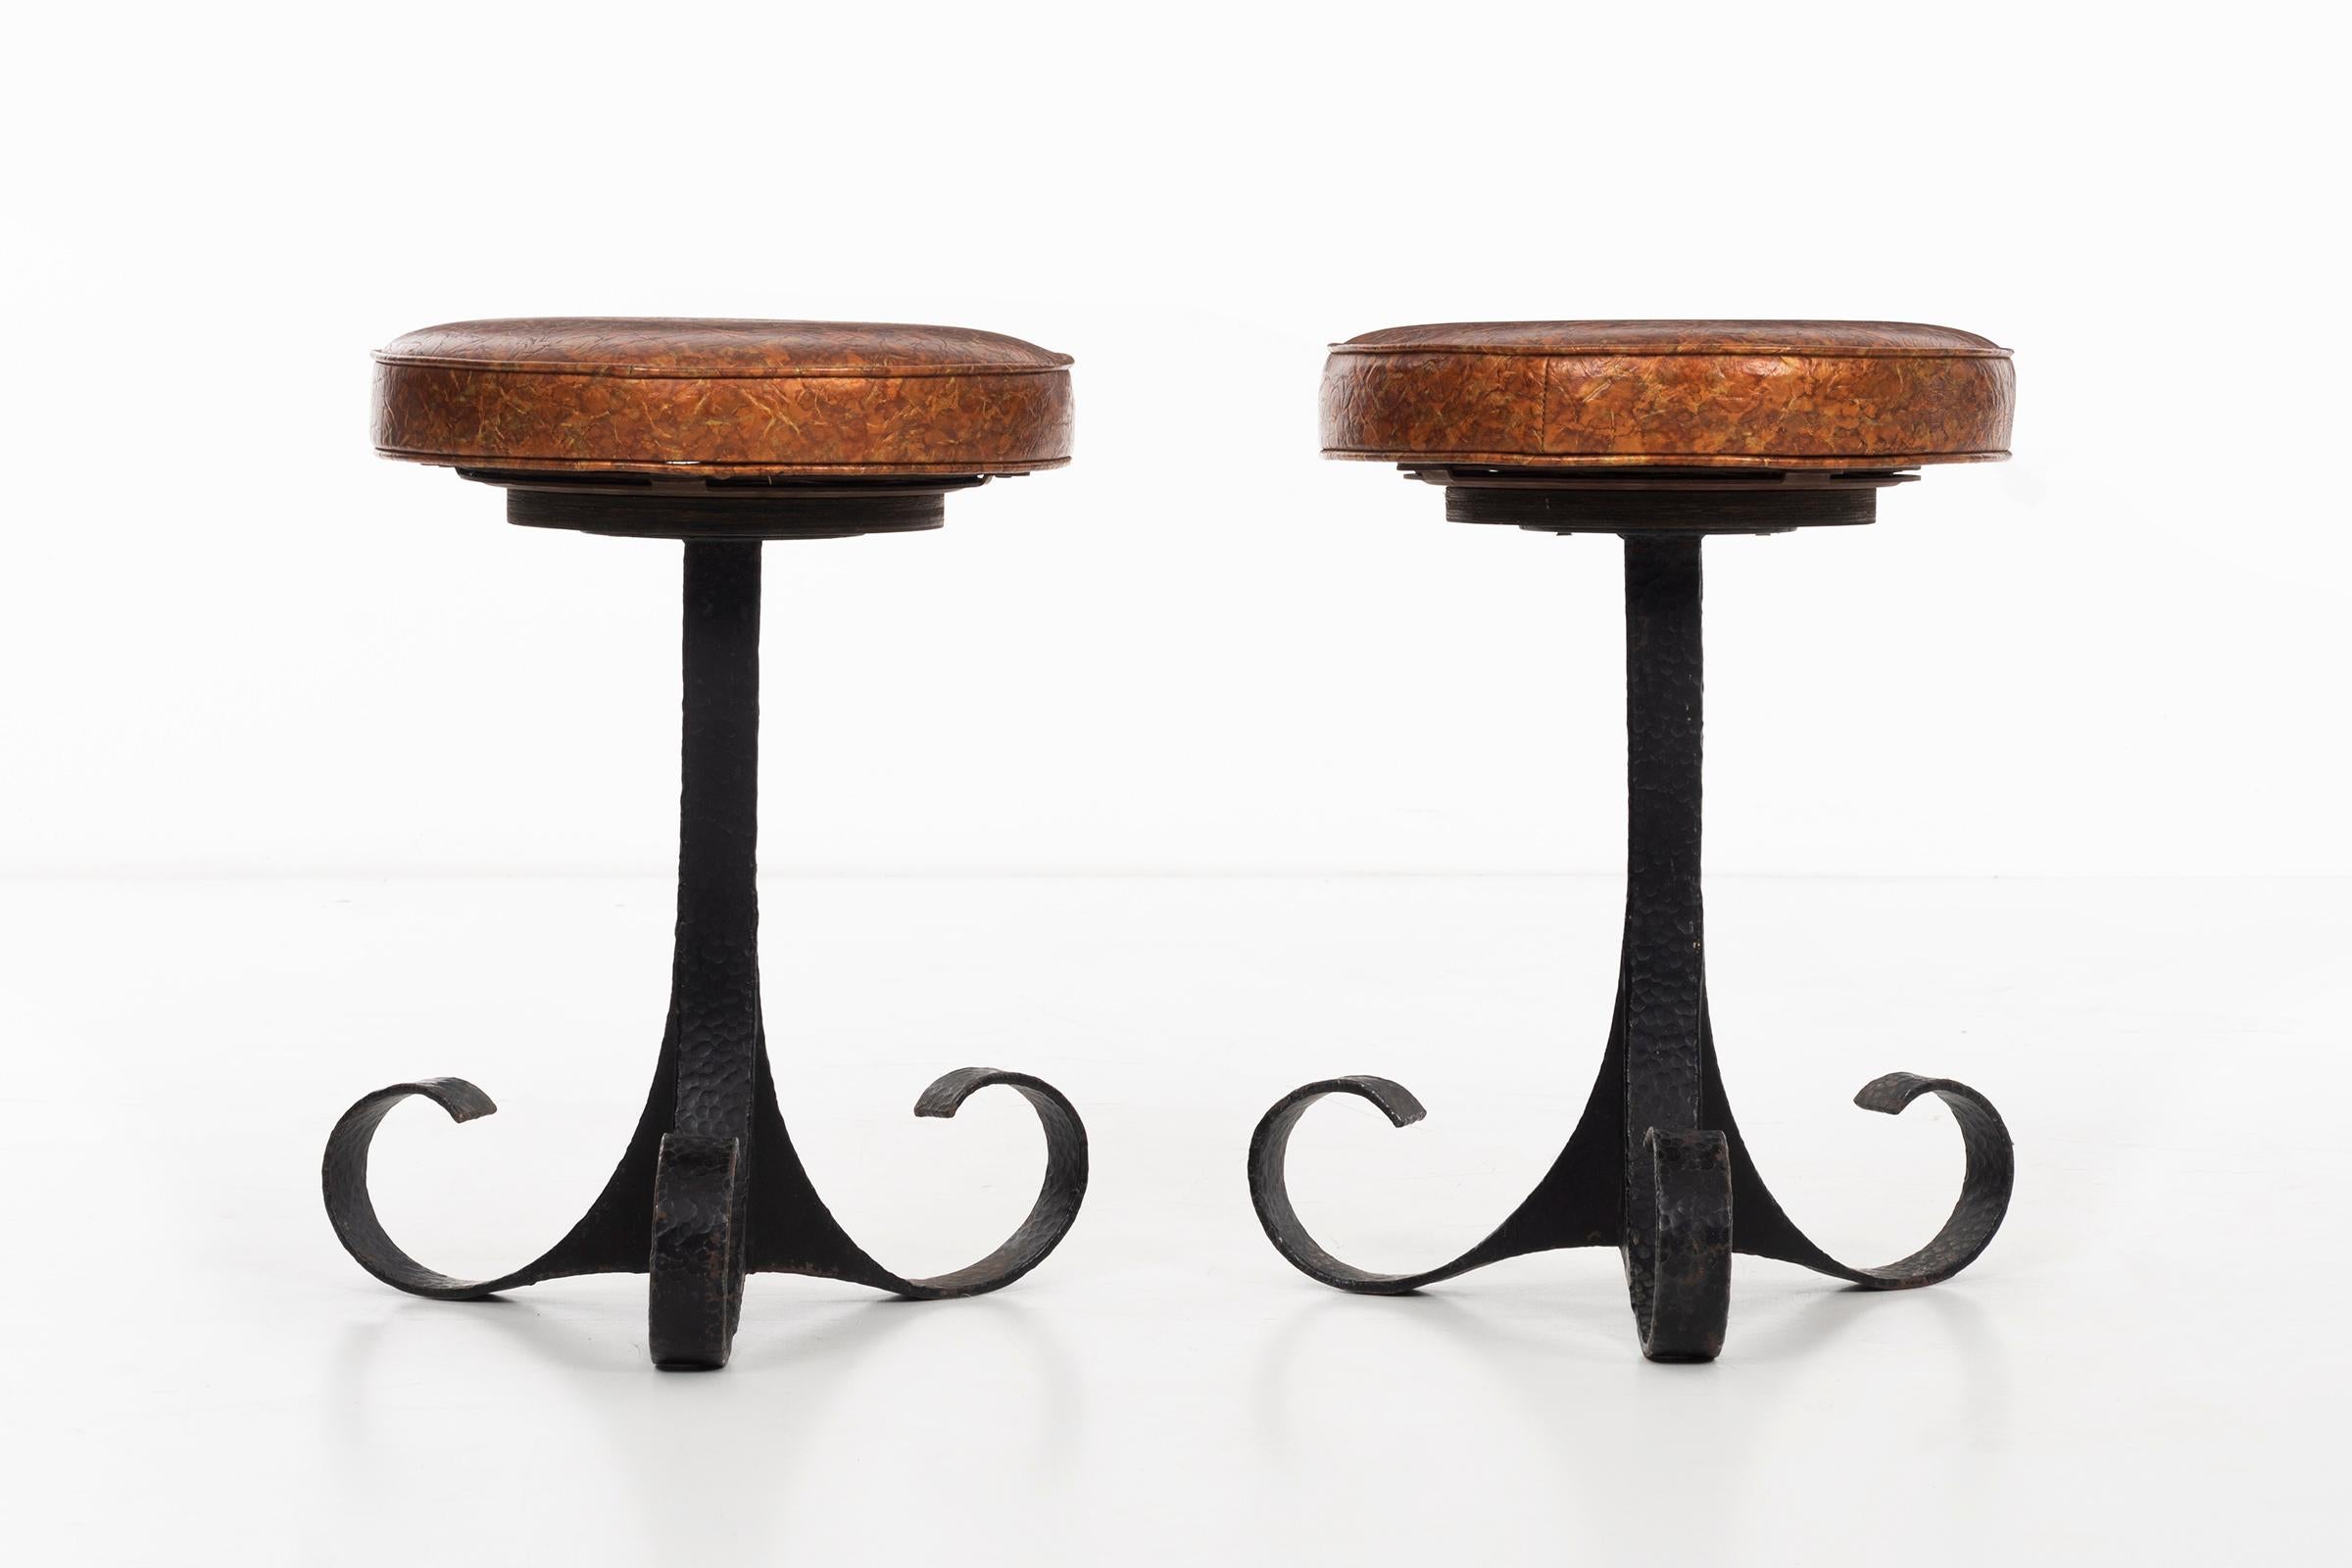 Hand-hammered swivel stools, scroll legs with original iridescent colored vinyl.